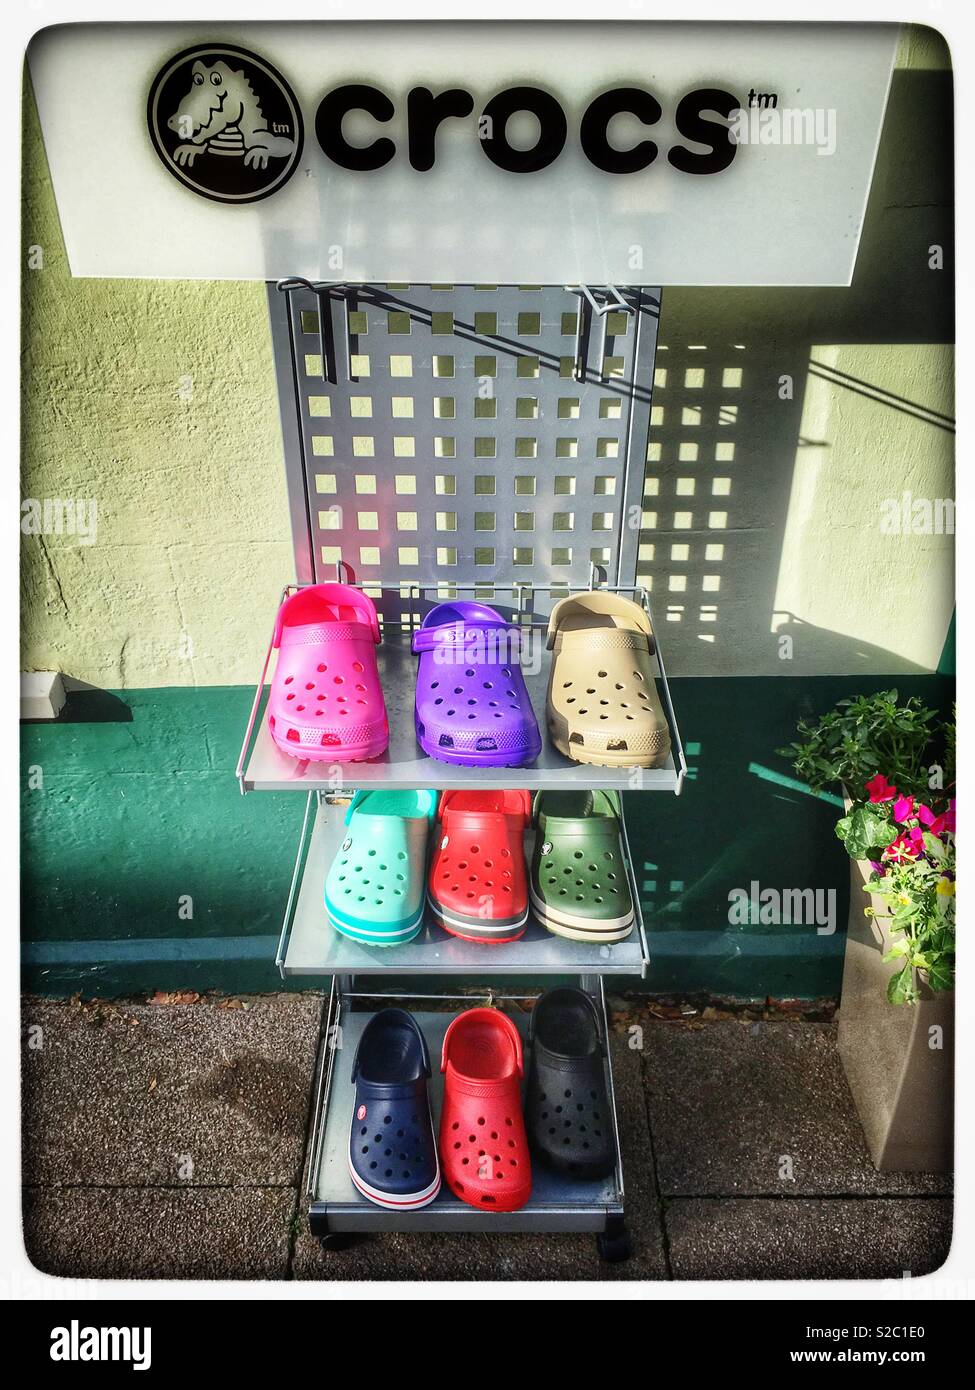 Crocs shoes display stand Stock Photo